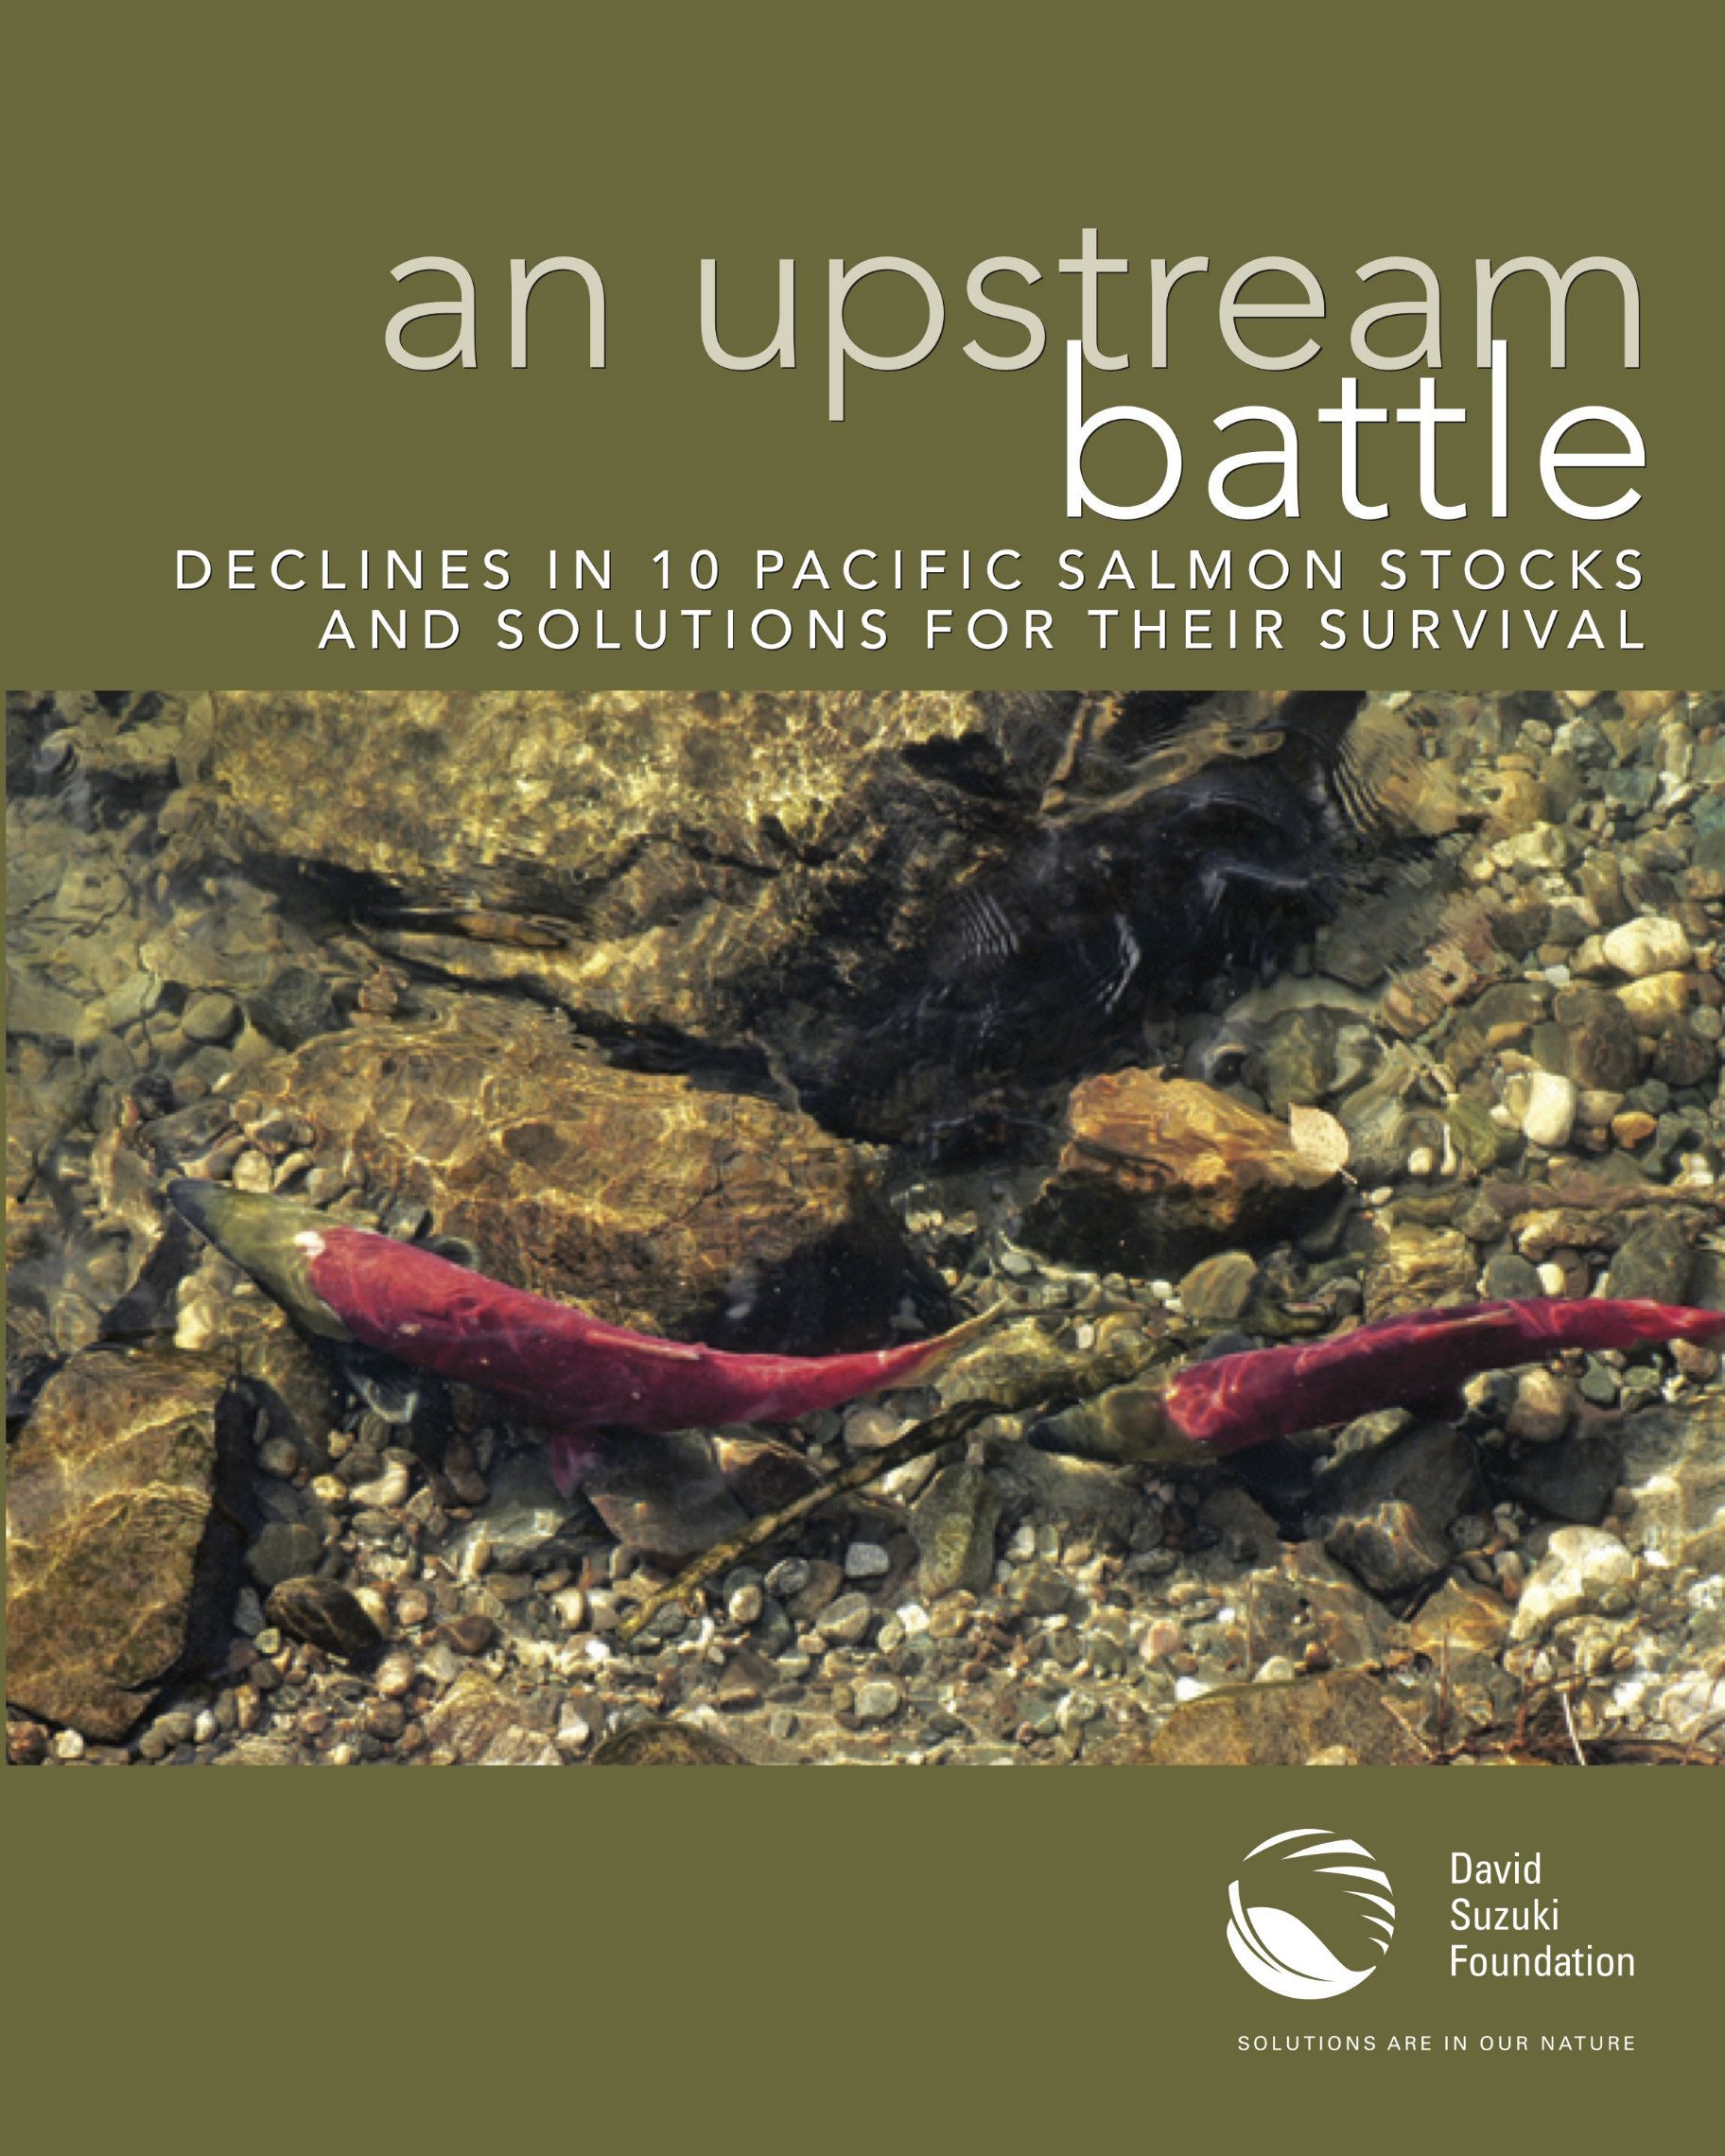 An Upstream Battle: Declines in 10 Pacific Salmon Stocks and Solutions for Their Survival